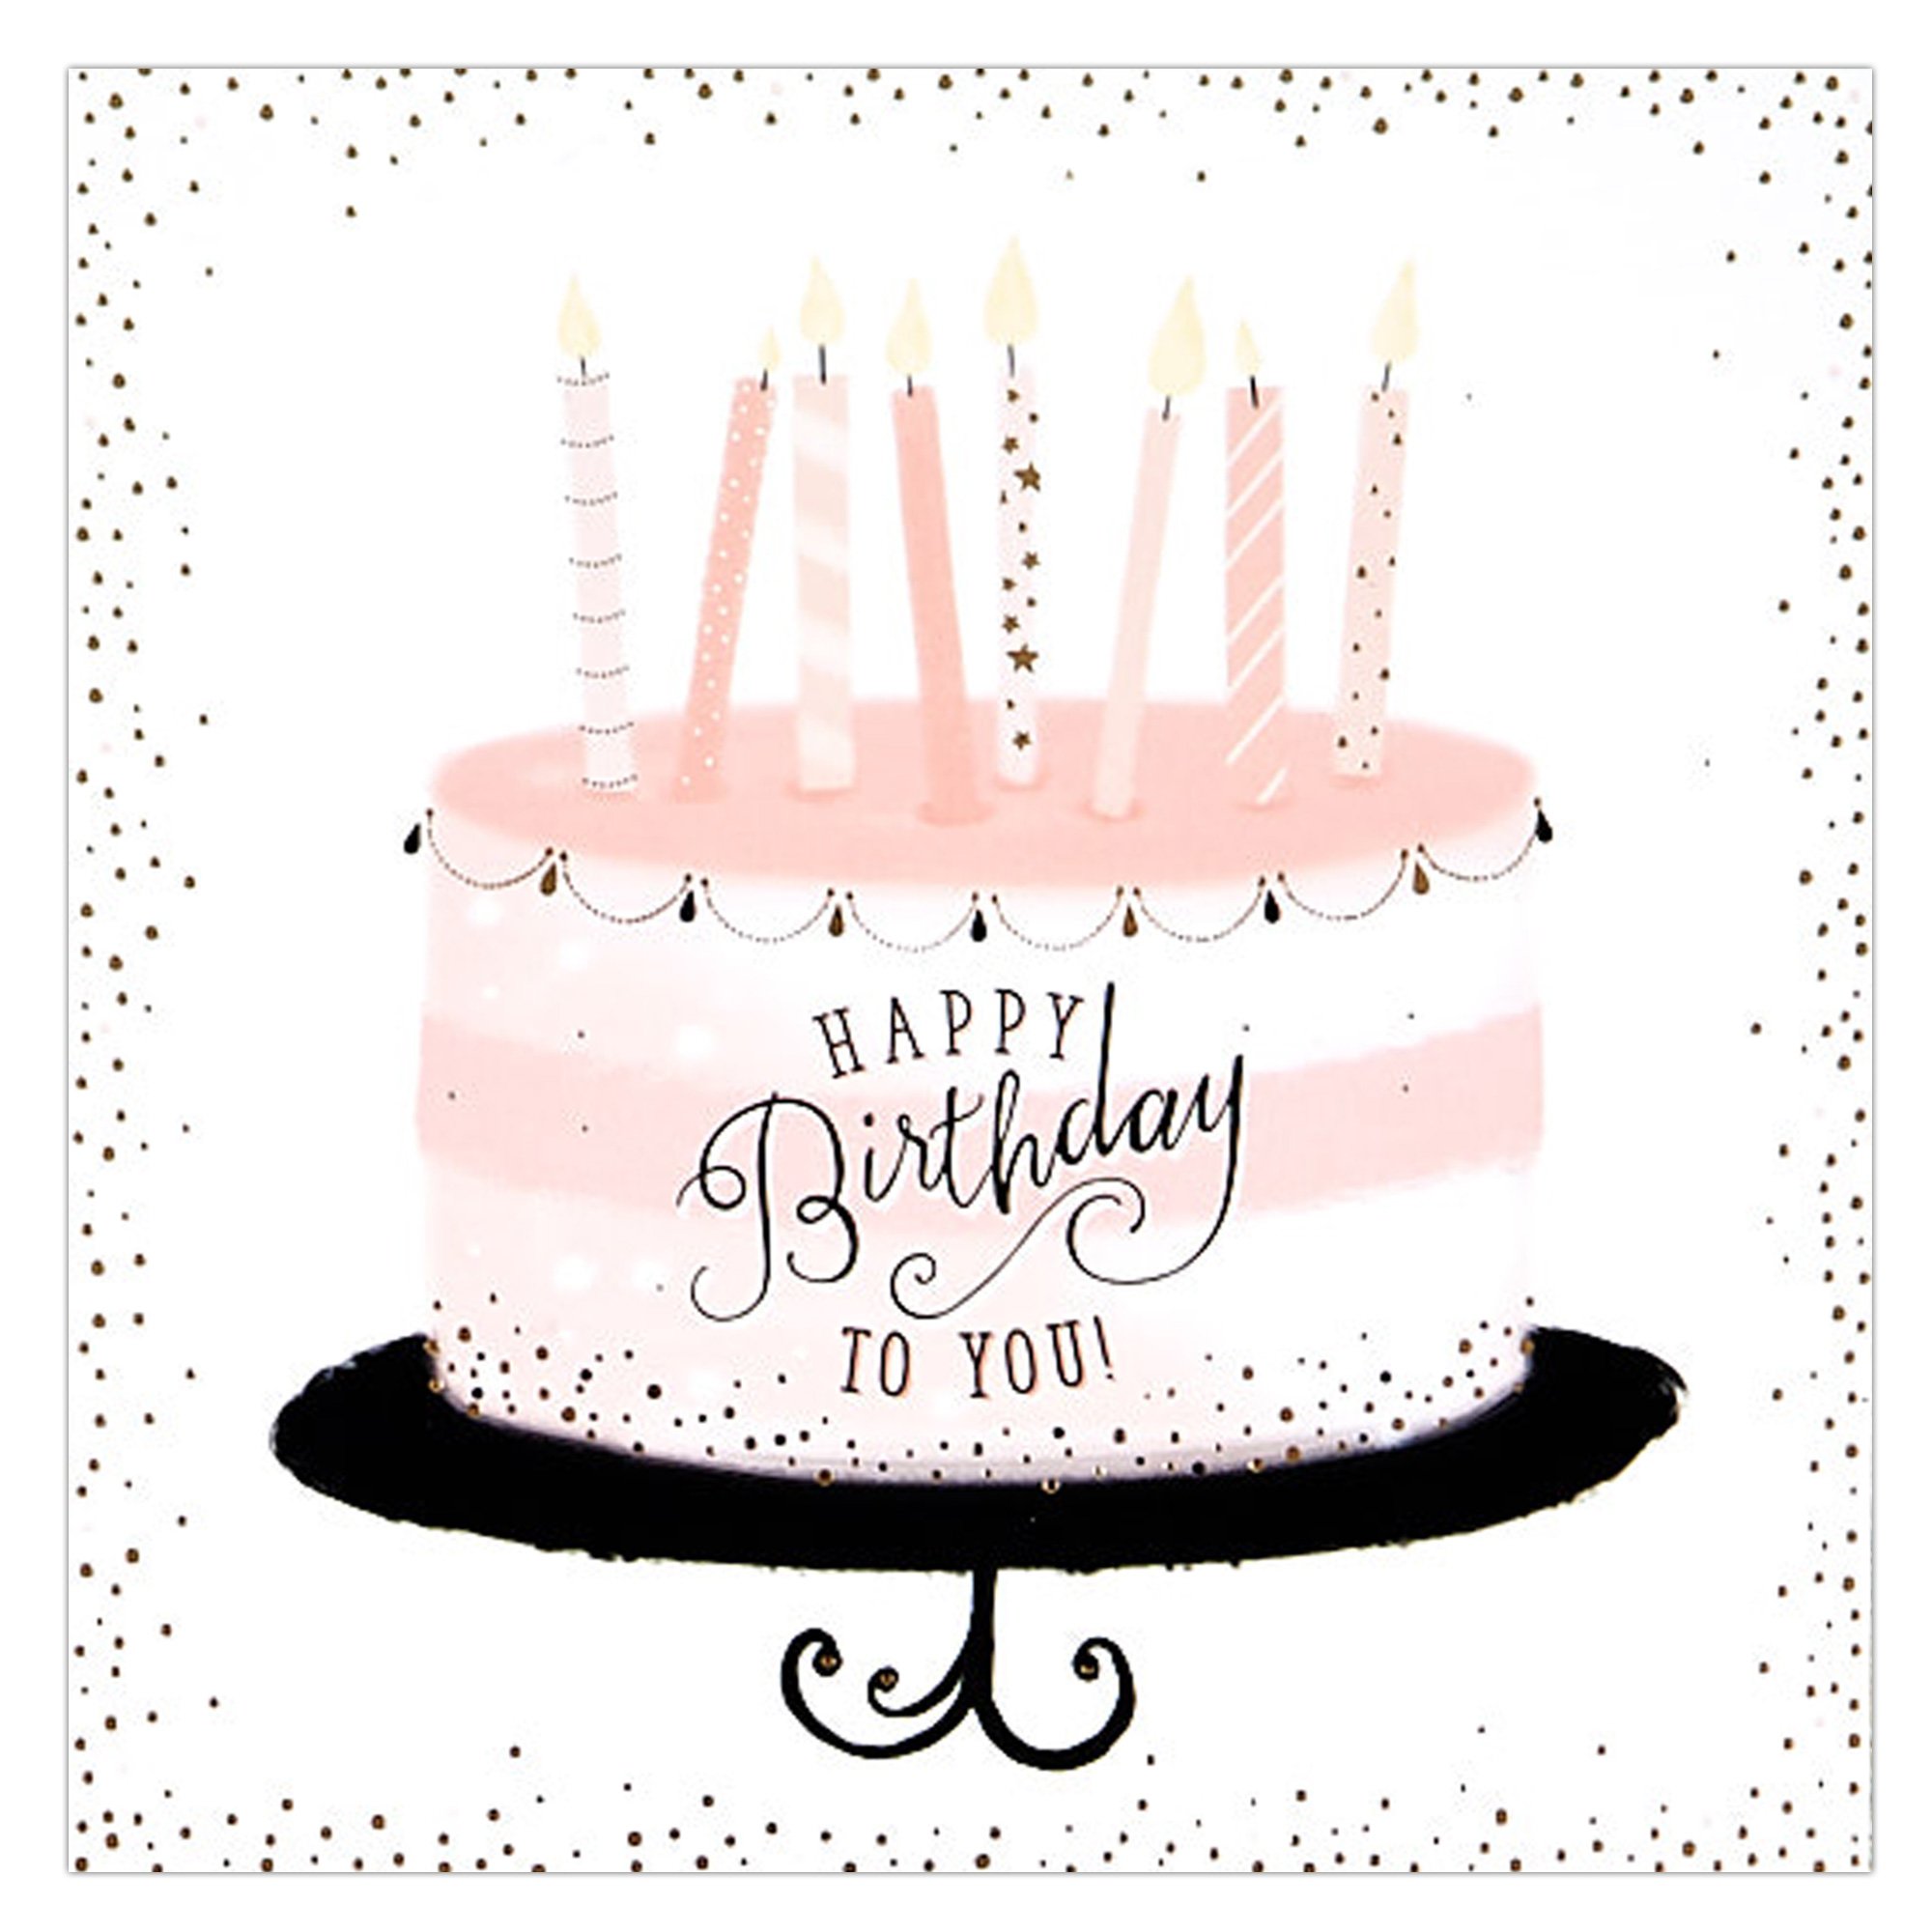 12 Birthday Cards - Pink Cake & Candles